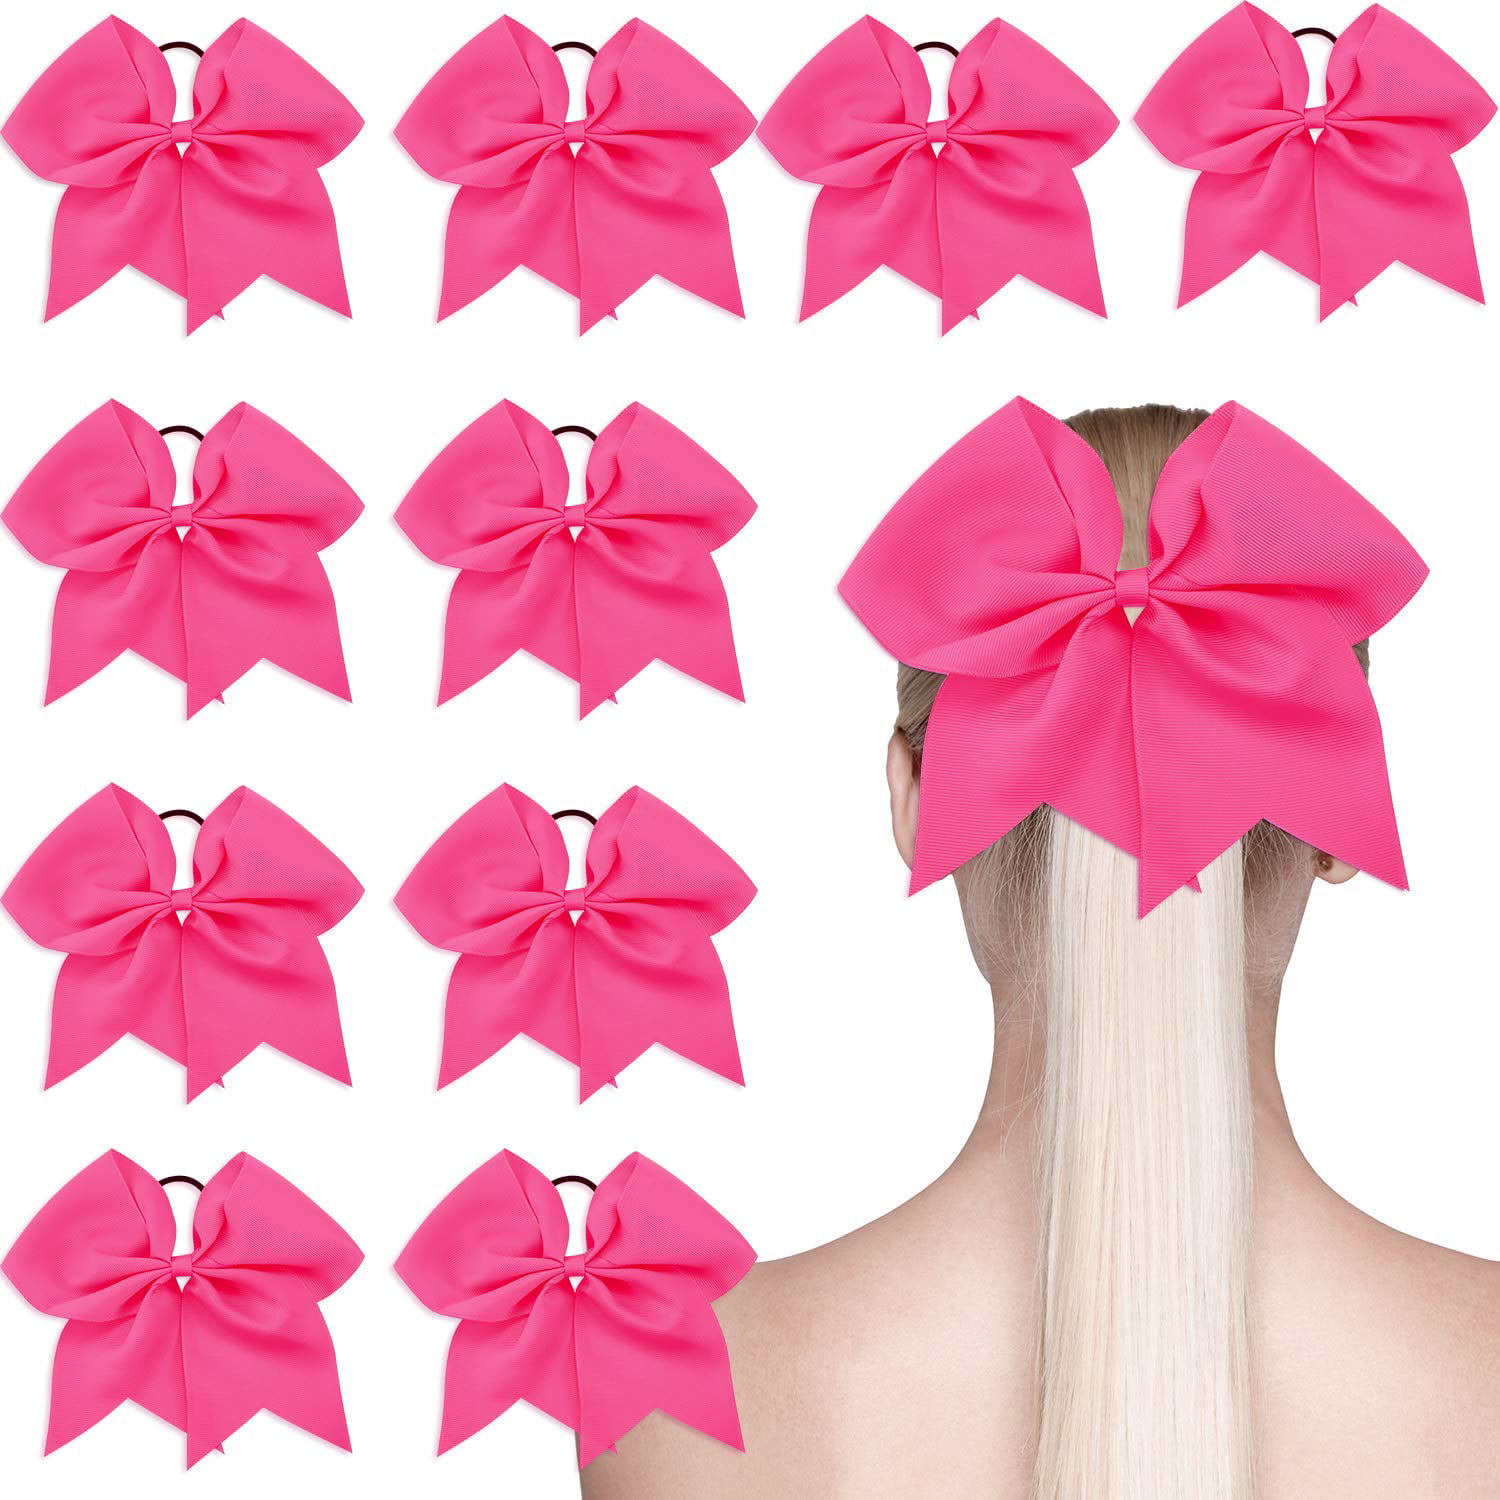 20 Pieces Breast Cancer Awareness Cheerleader Bow Cheerleading Hair Bow  Large Hair Bow, 7 Inch (Light Pink) | Walmart Canada